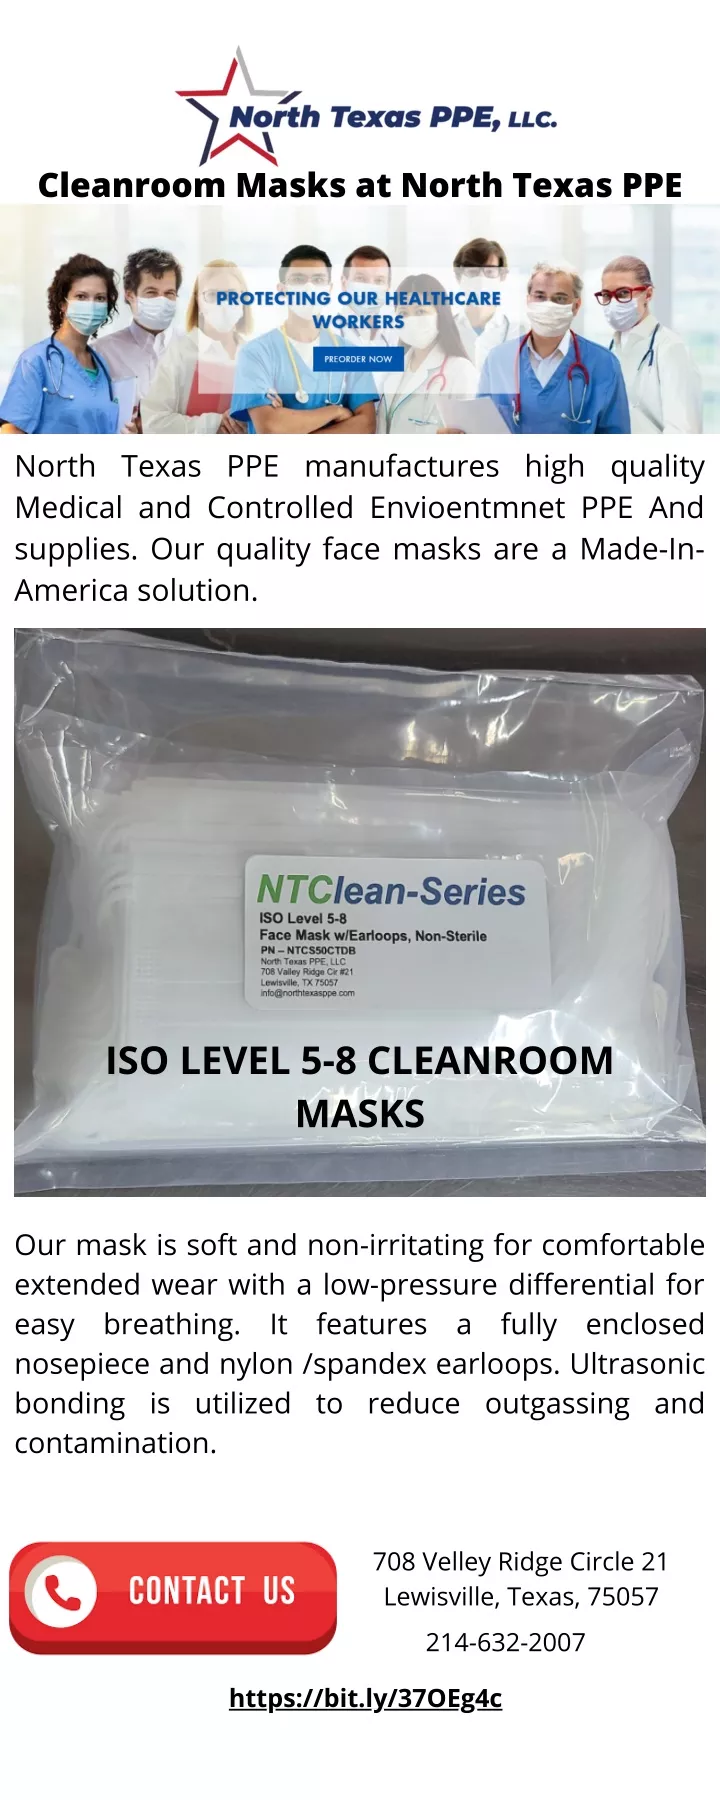 cleanroom masks at north texas ppe